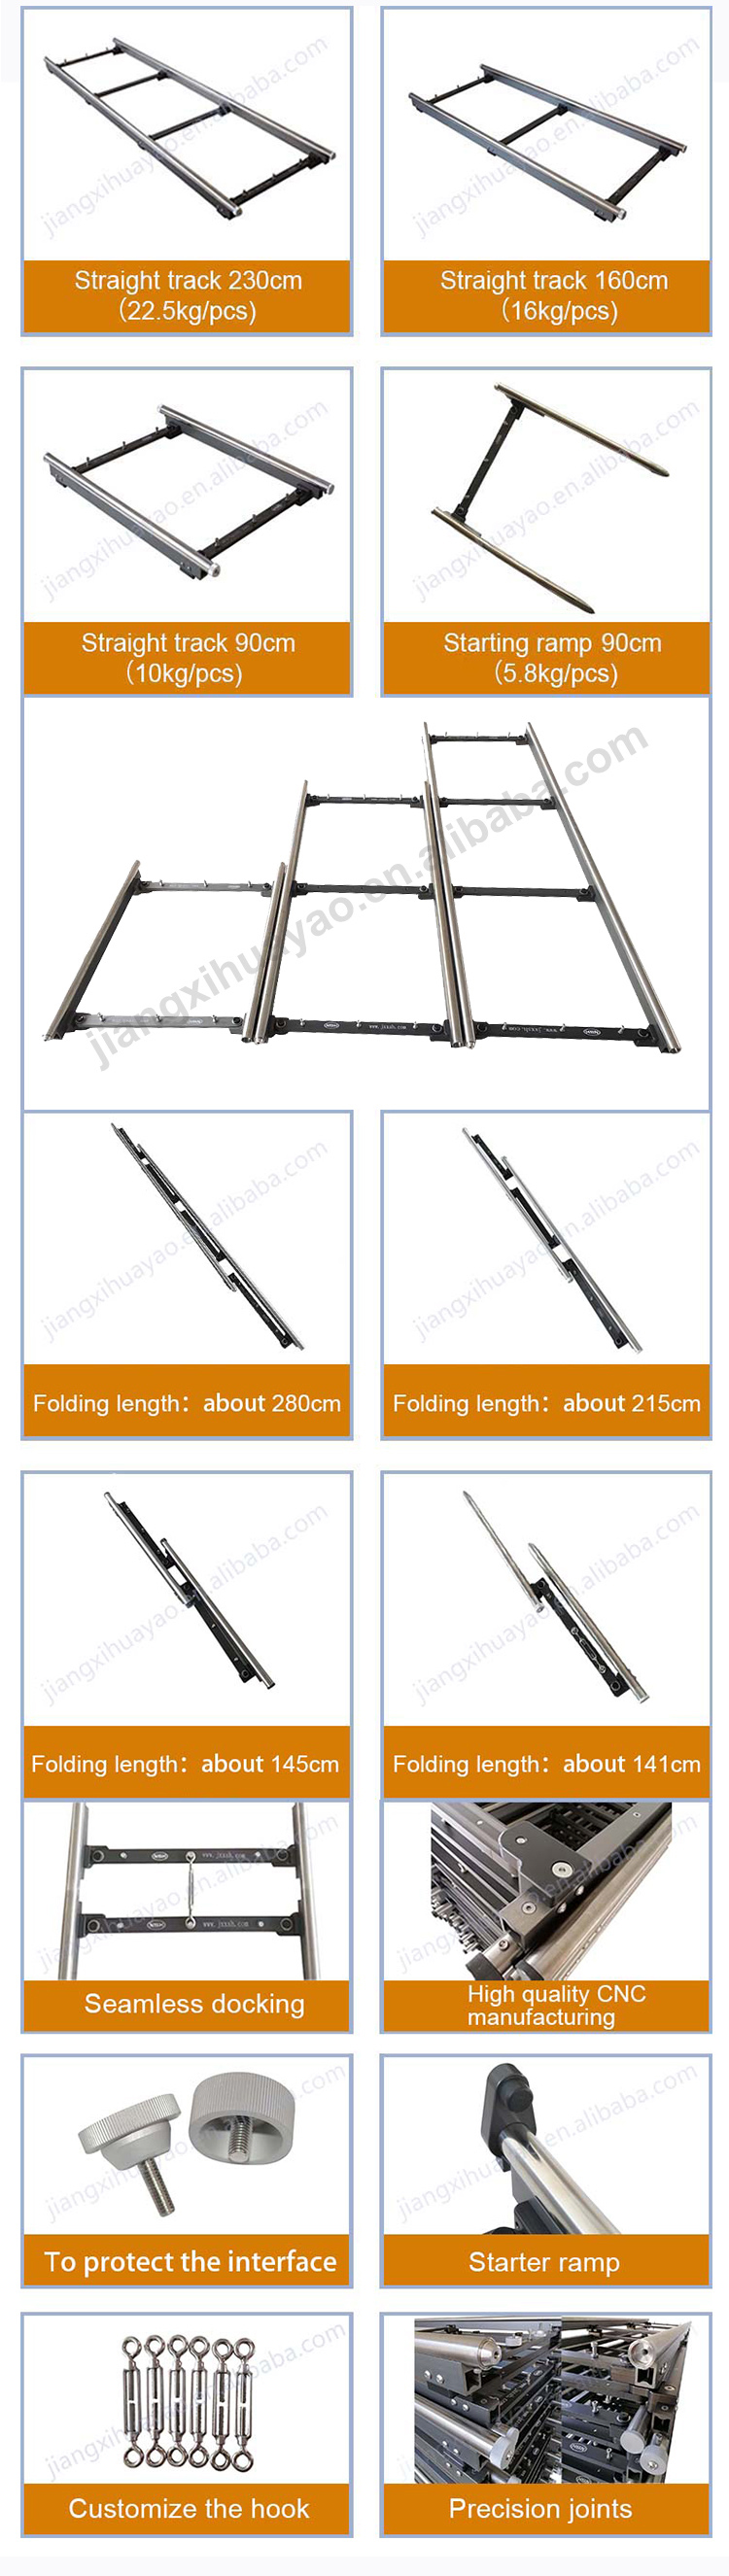 NSH--Promotional Top Quality Camera Track Dolly Straight Slider For Sale